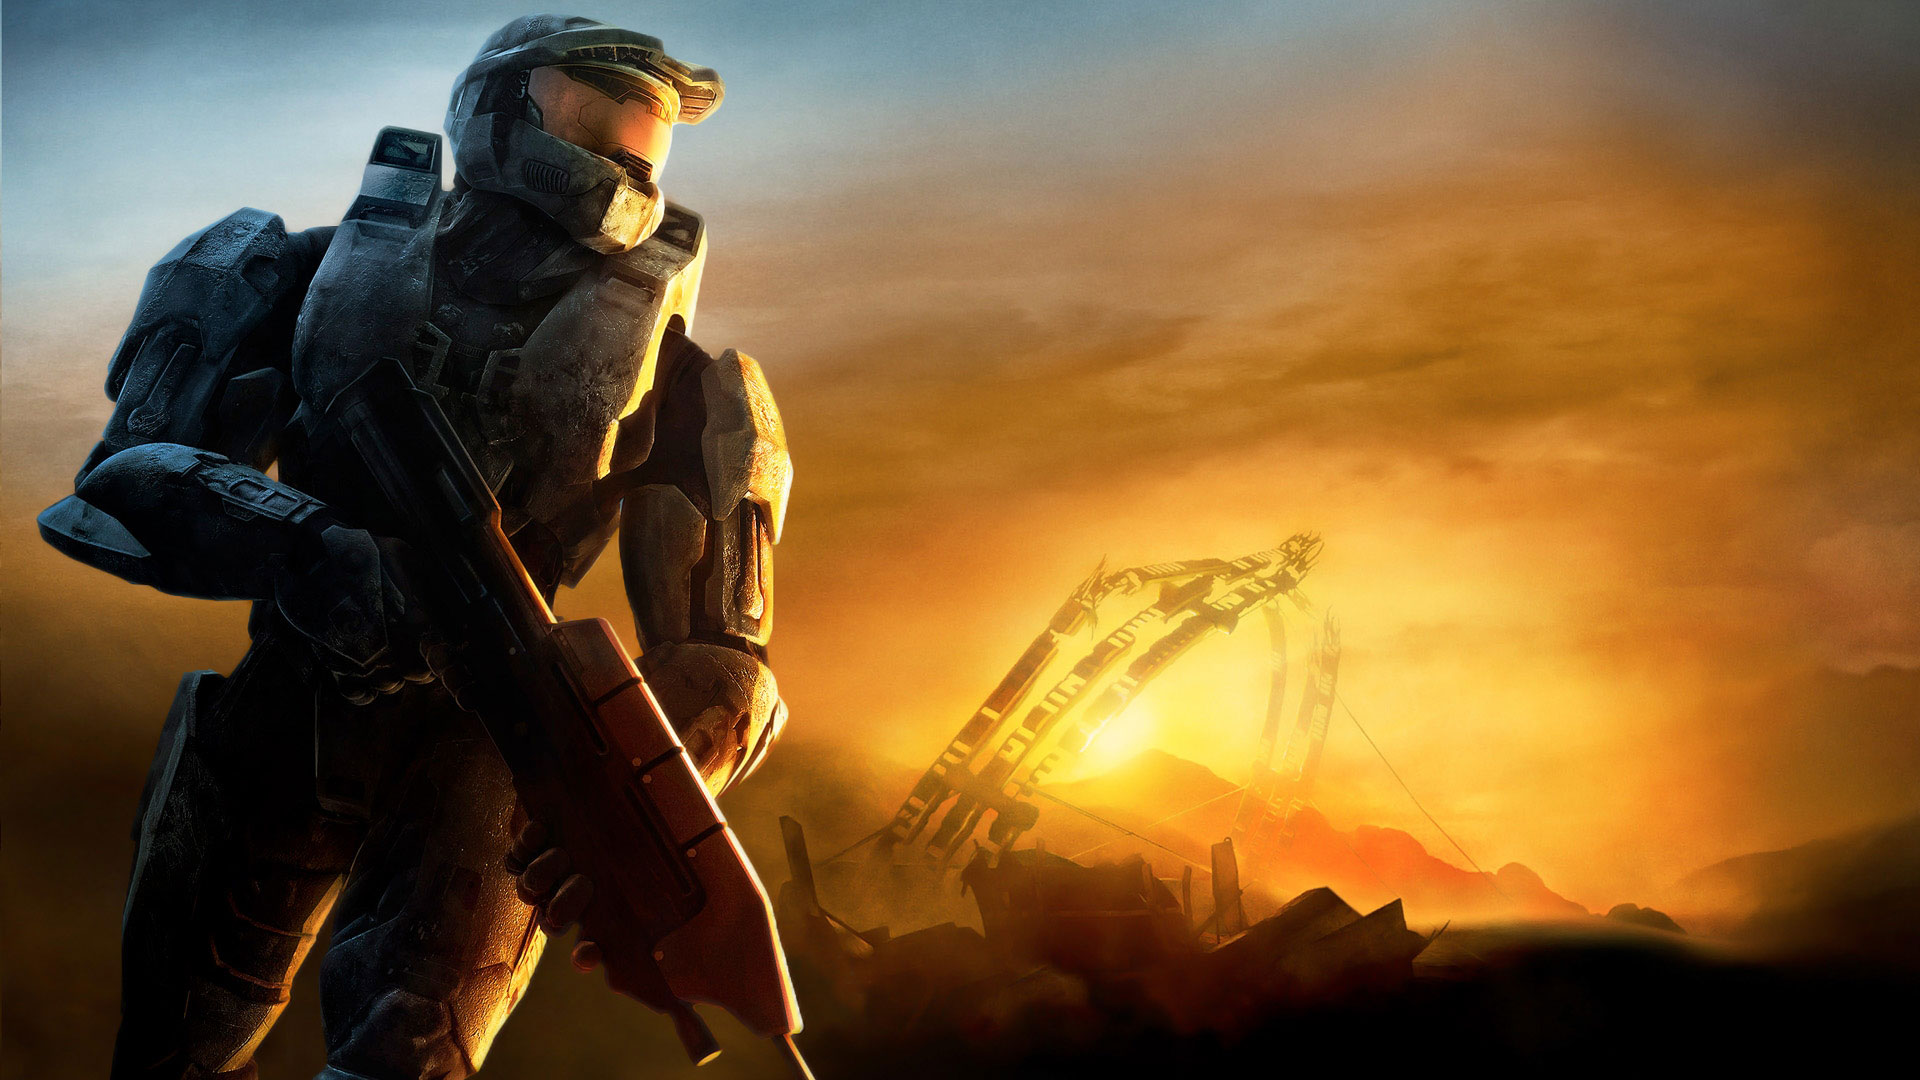 Halo Wallpaper Image Background 1080p Cool